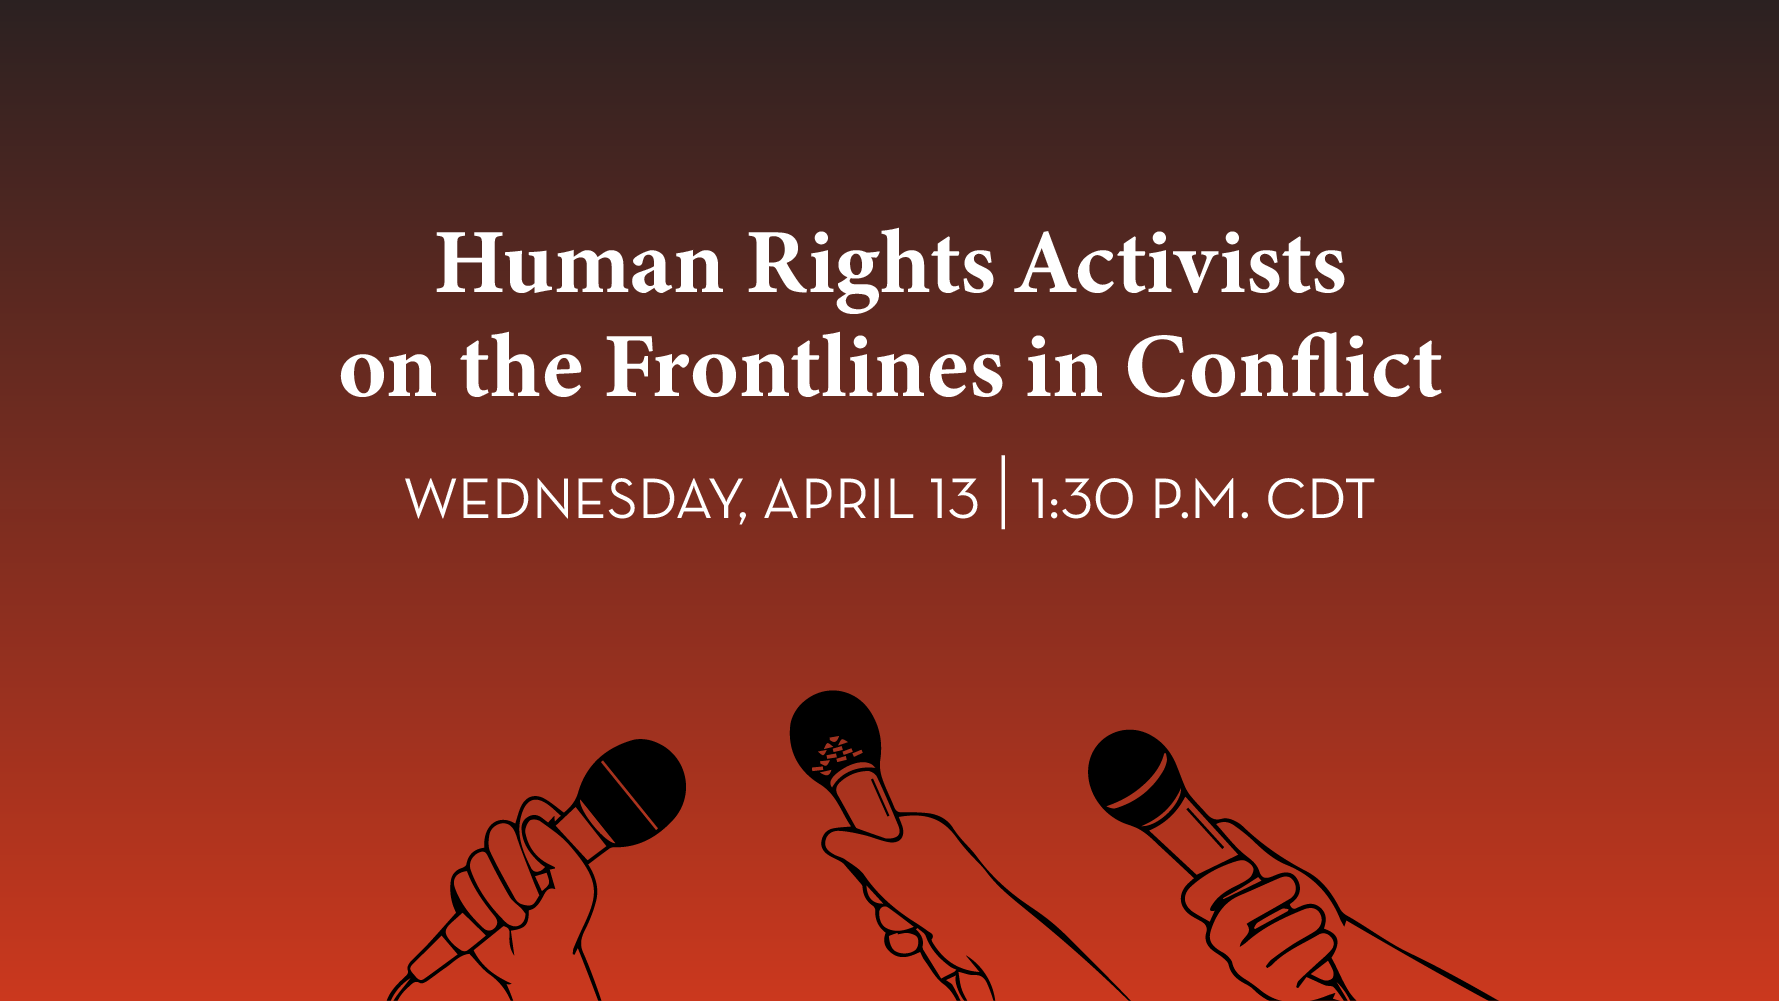 Human Rights Activists on the Frontlines in Conflict. April 13. 1:30 P.M. CDT